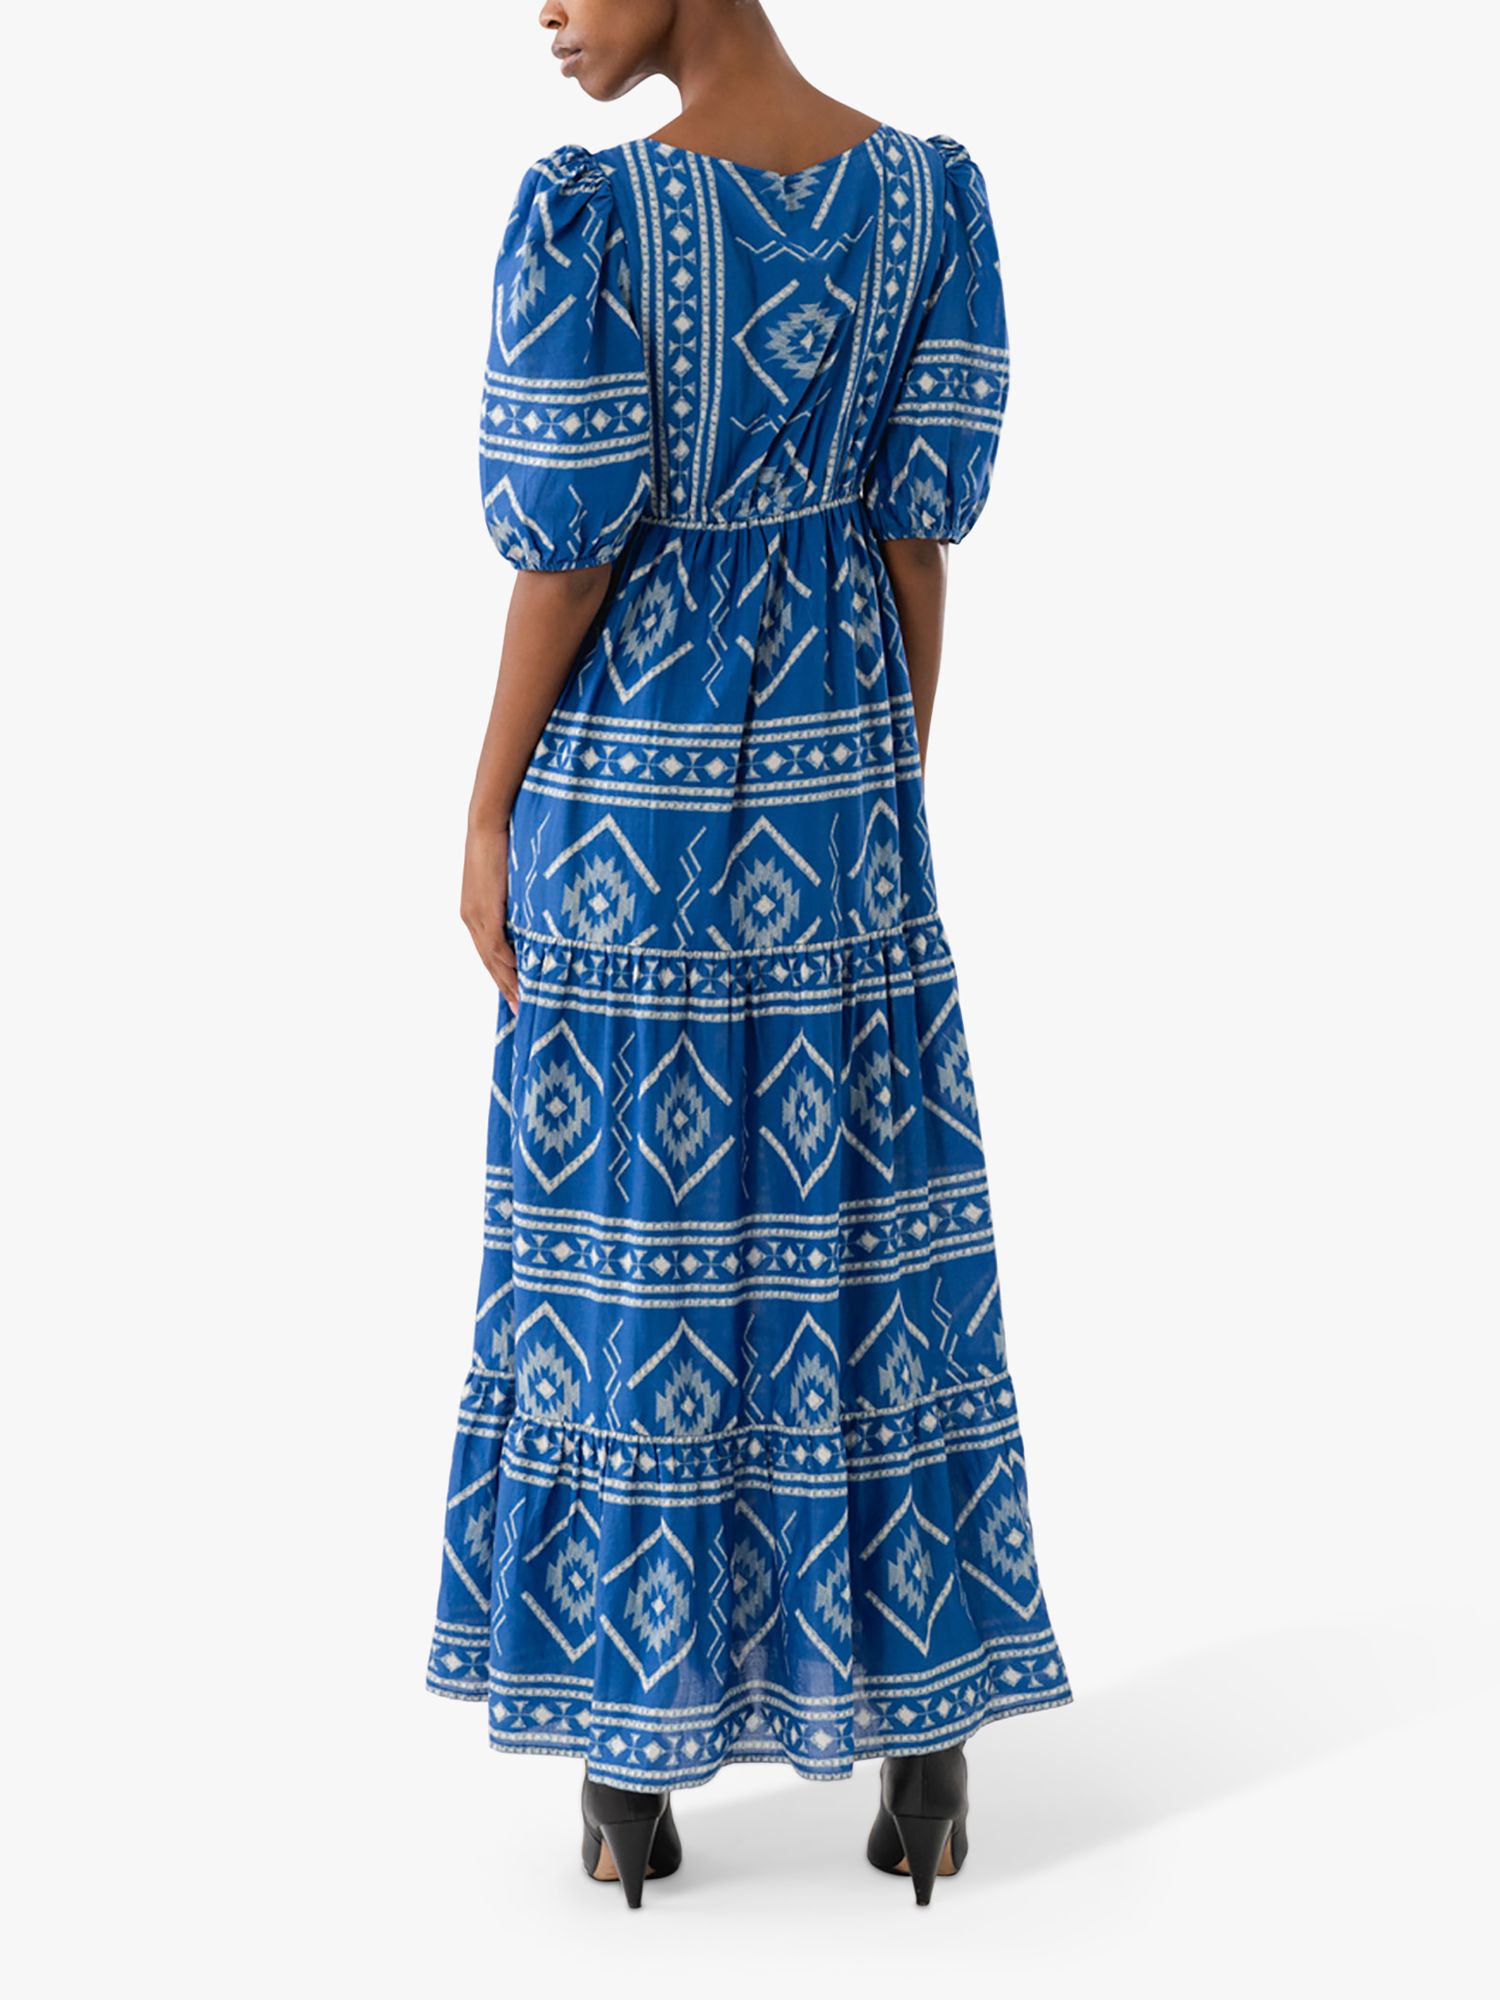 Lollys Laundry Gambo Abstract Print Maxi Dress, Blue/White, XS